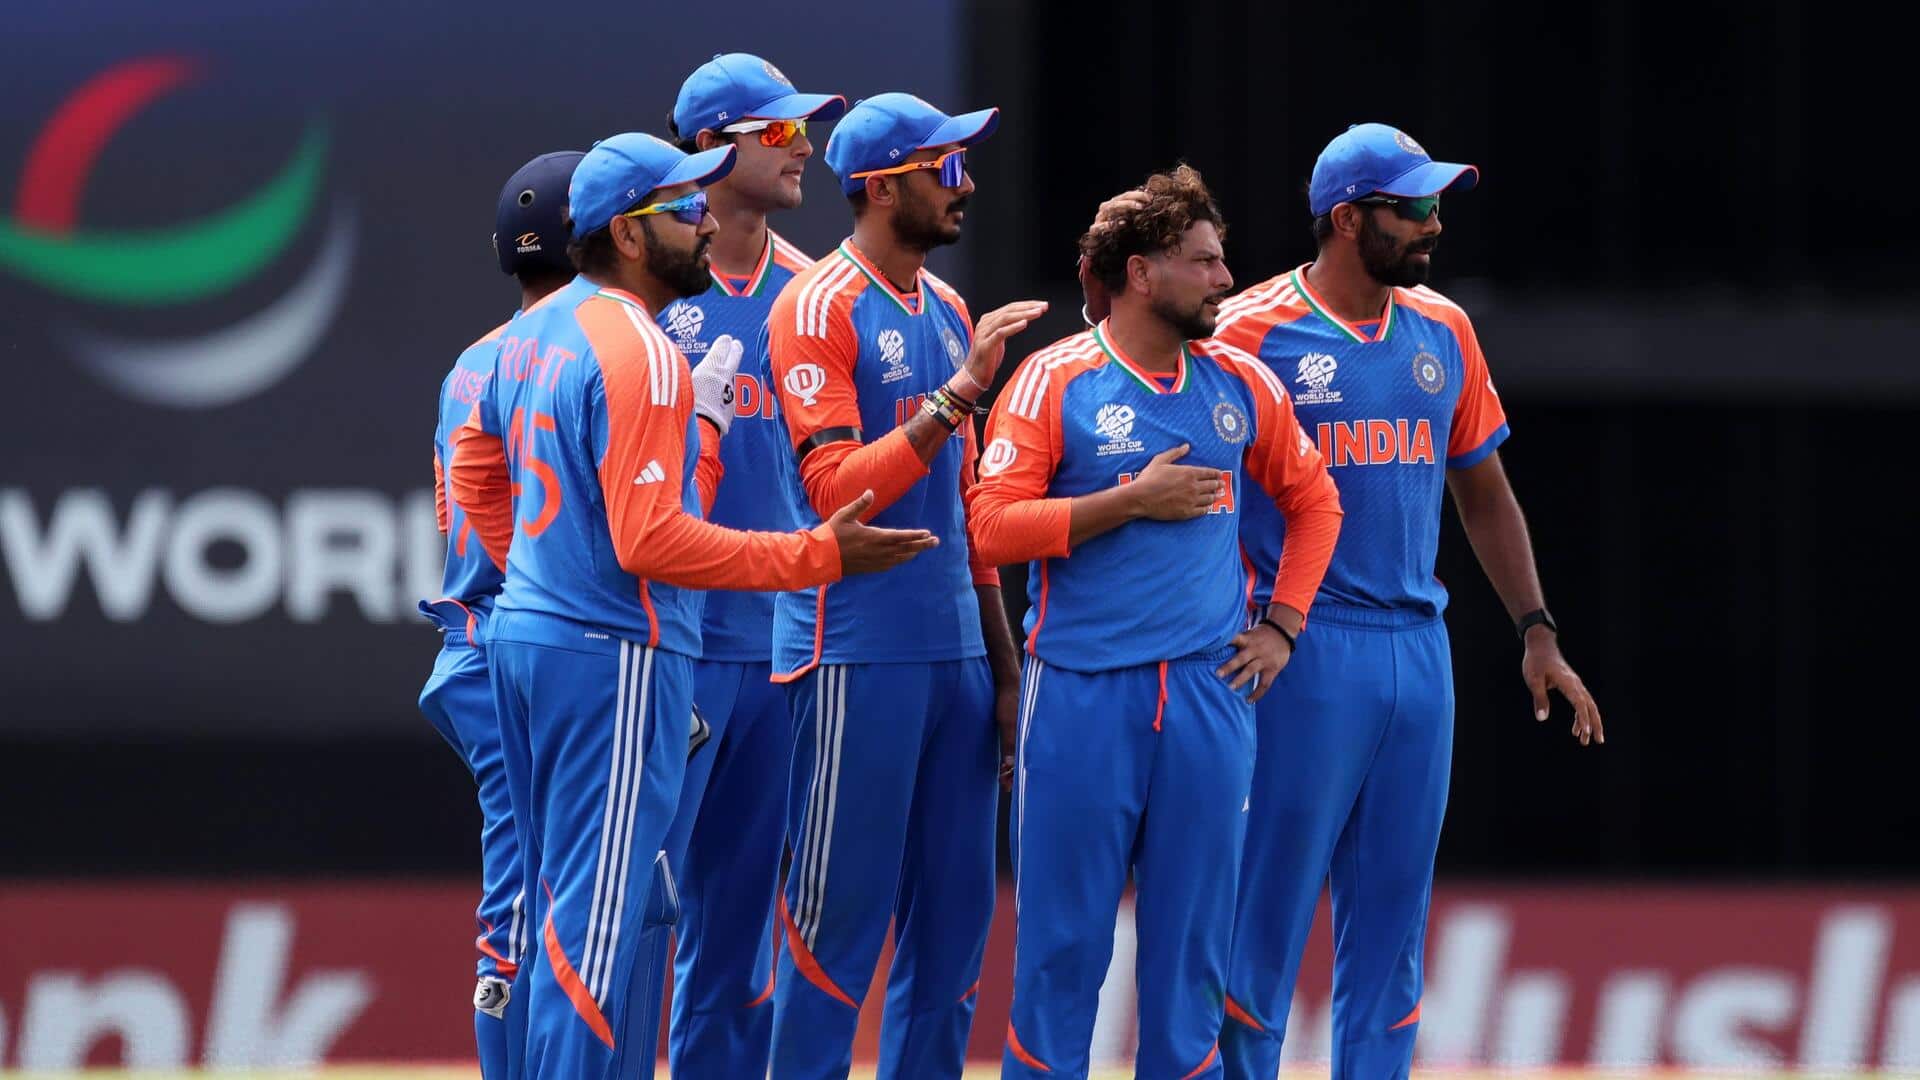 T20 World Cup: India go 13-1 against Bangladesh in T20Is